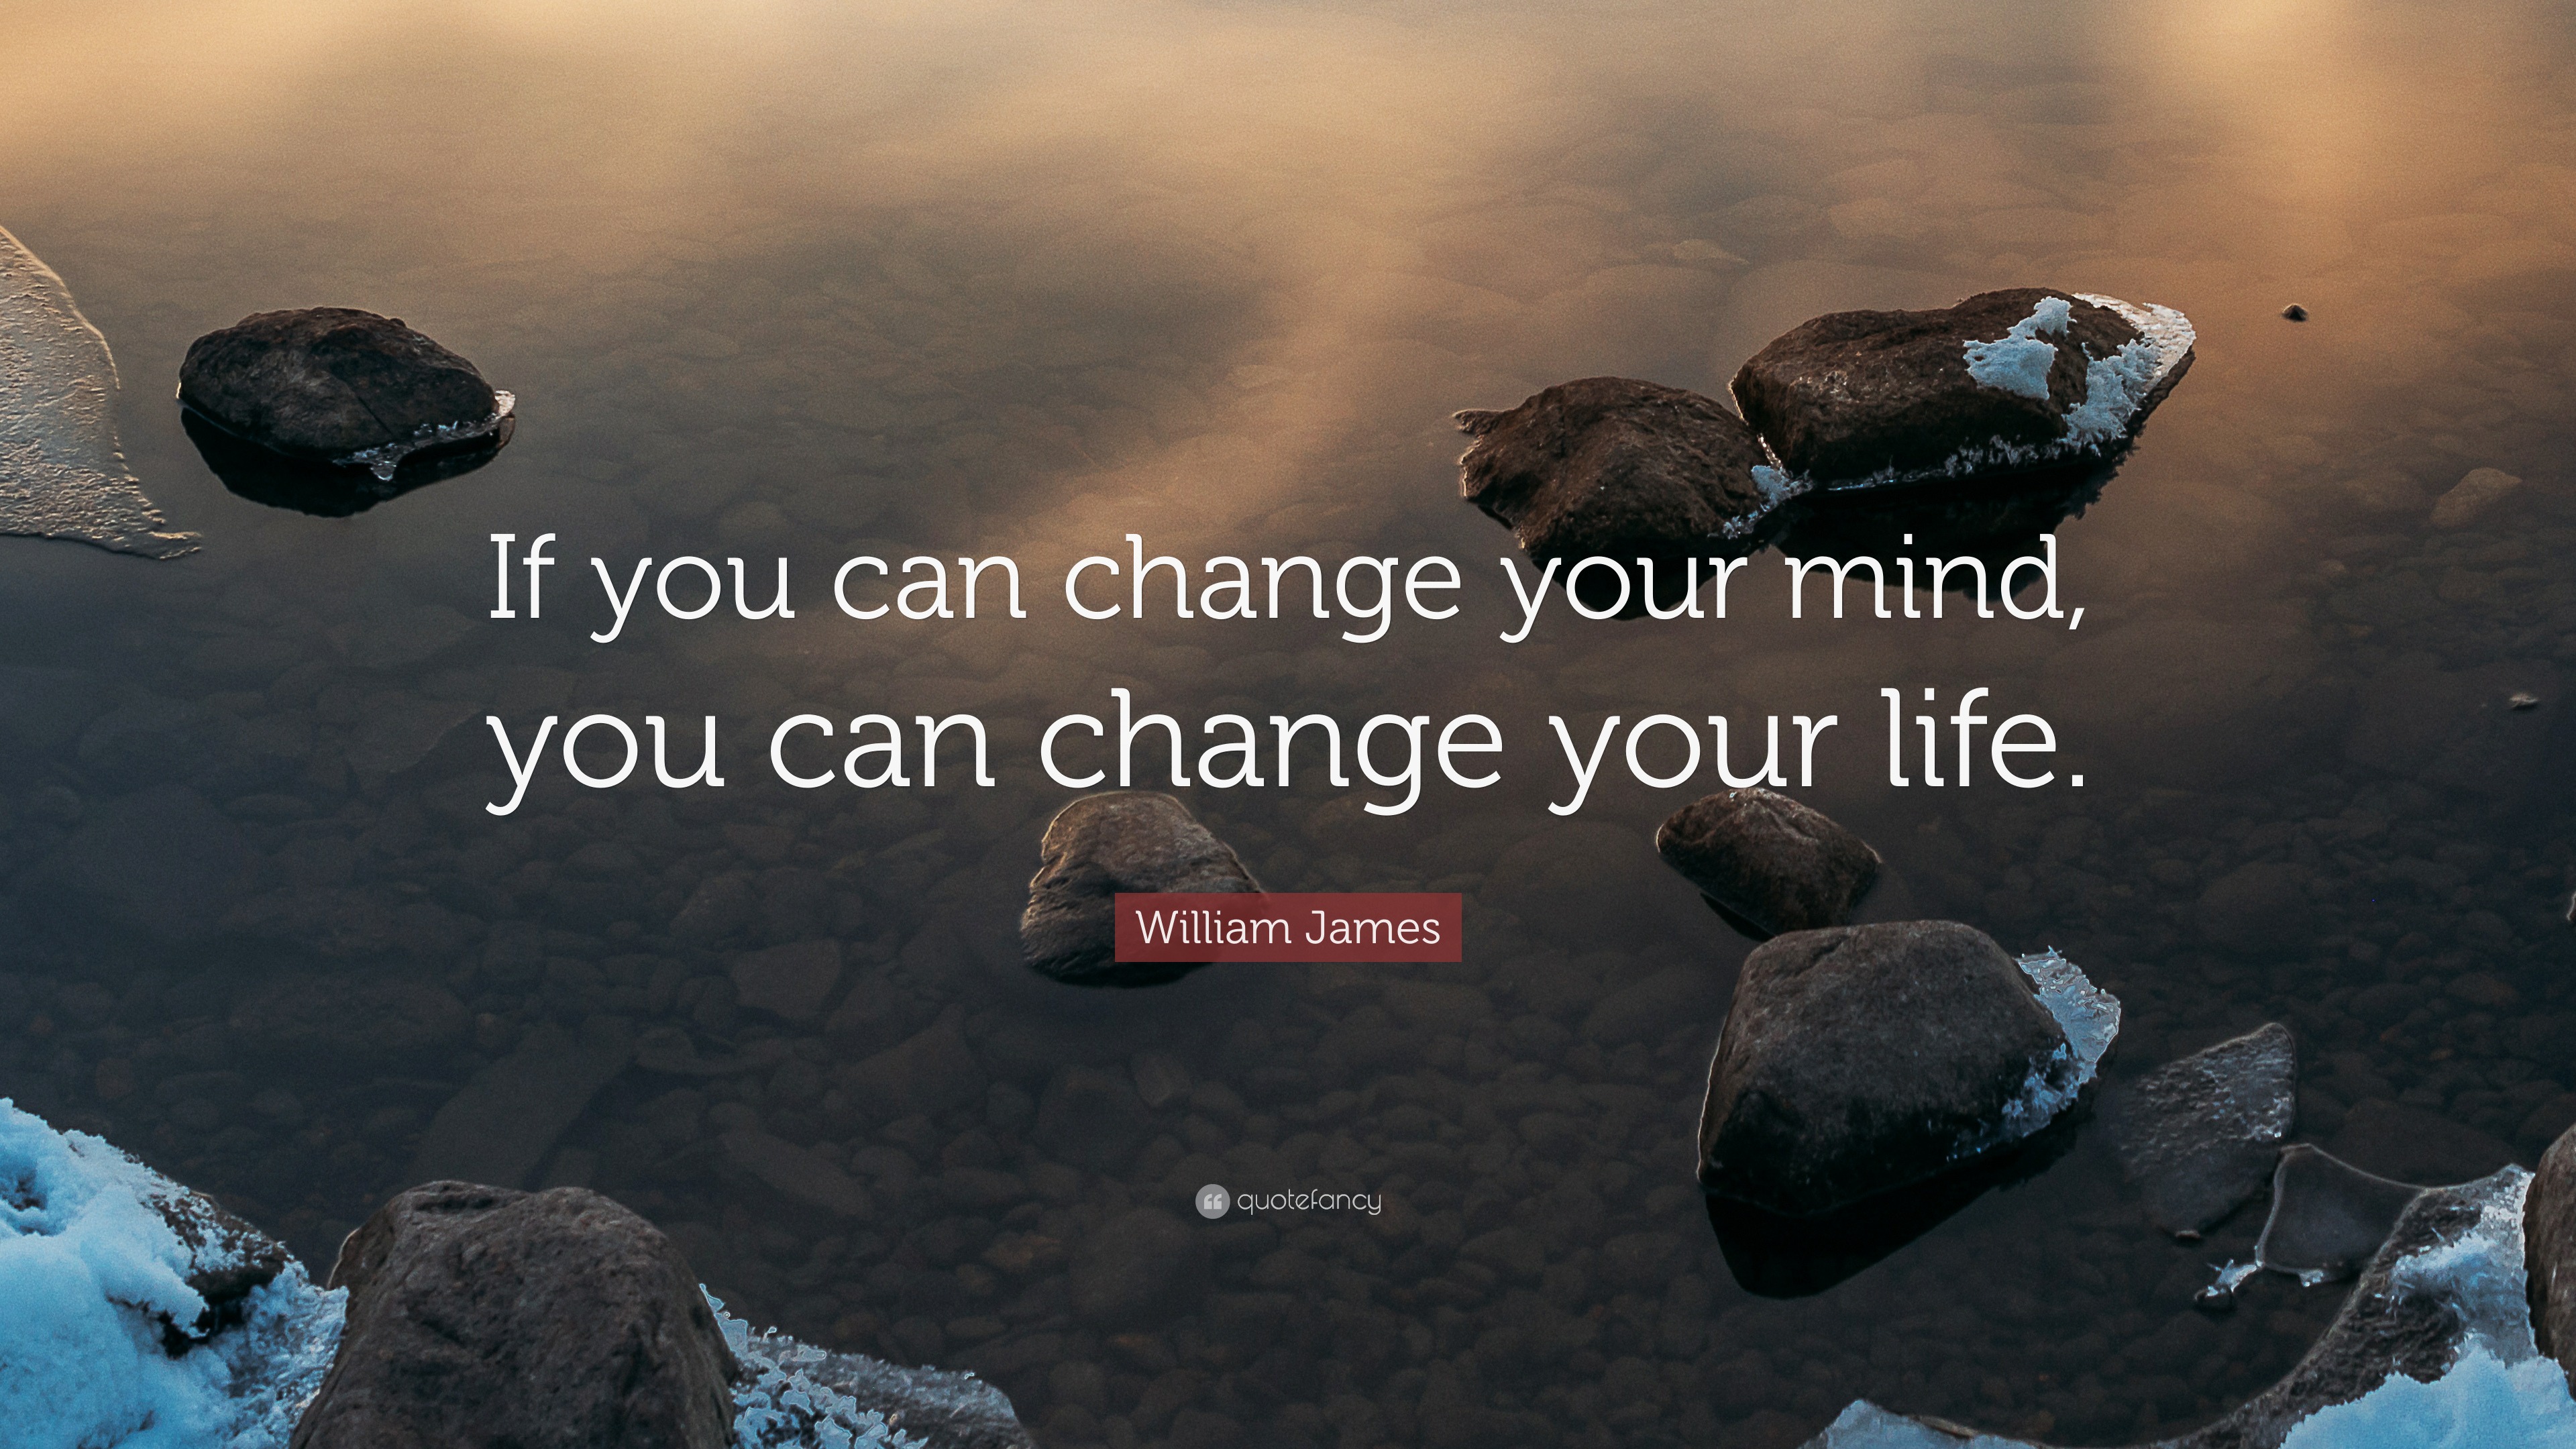 William James Quote: “If you can change your mind, you can change your ...